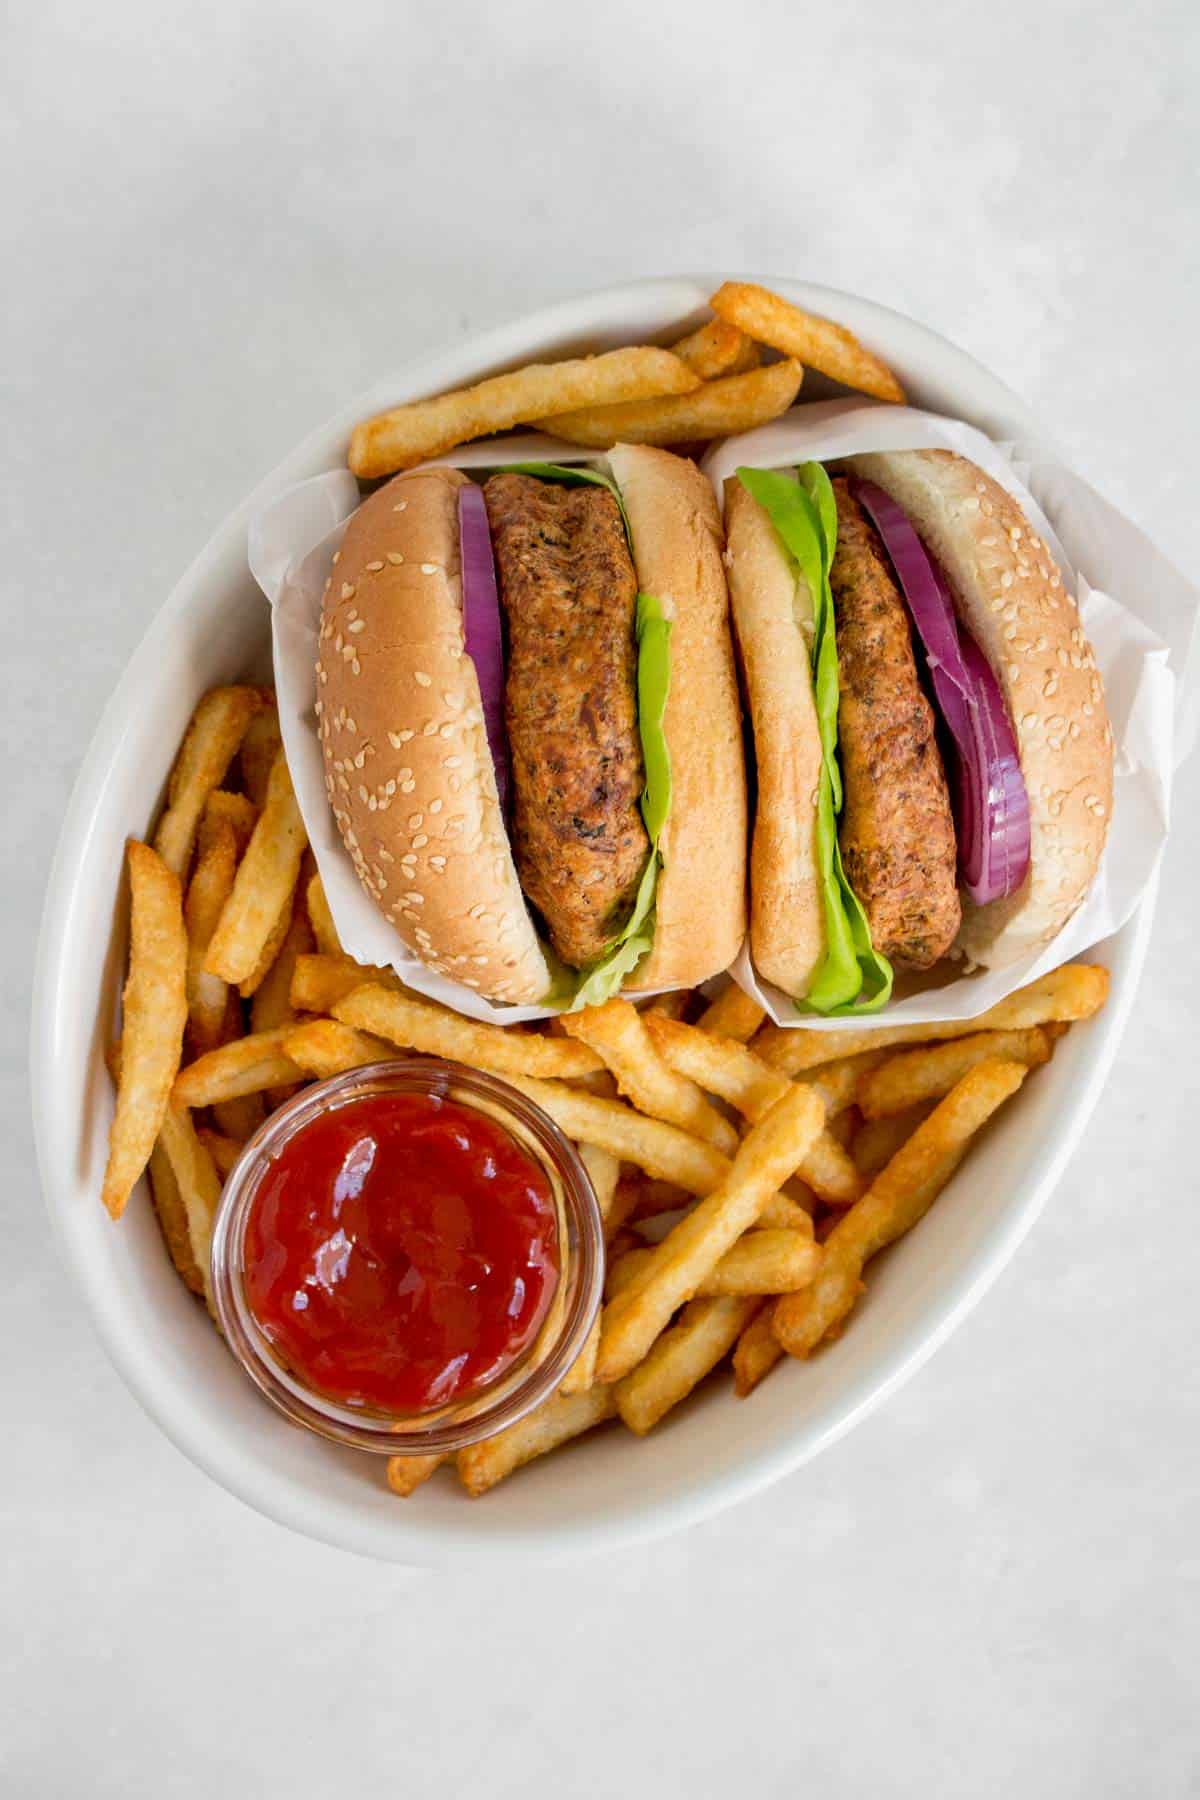 Overhead view of a serving dish with two turkey burgers, fries, and ketchup